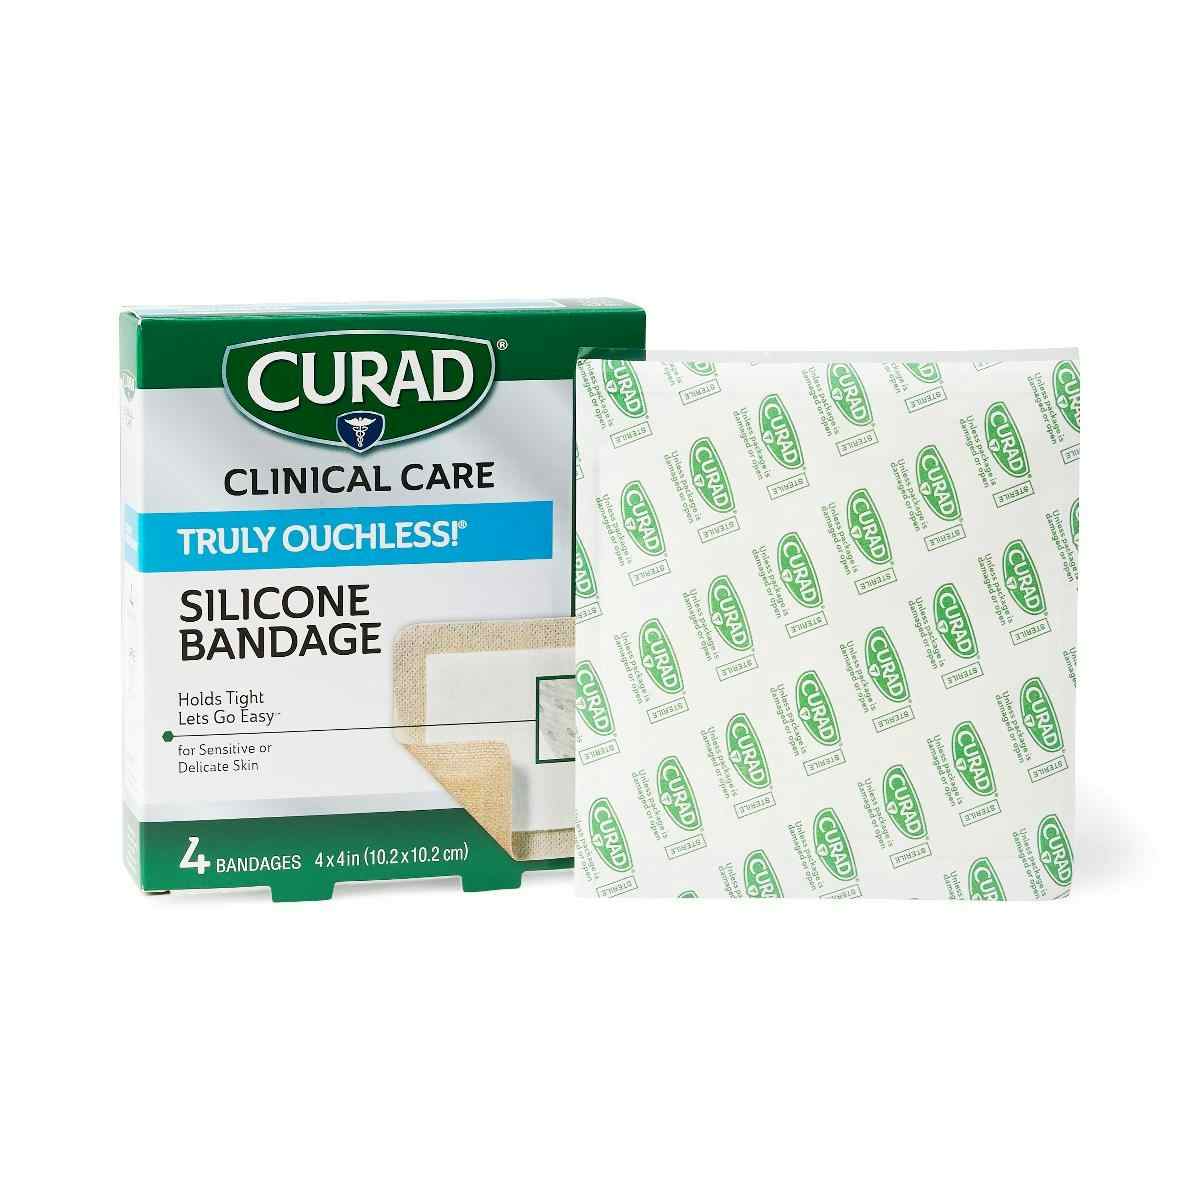 Curad Truly Ouchless Silicone Bandages, CUR5001V1H, 4" X 4" - Box of 4